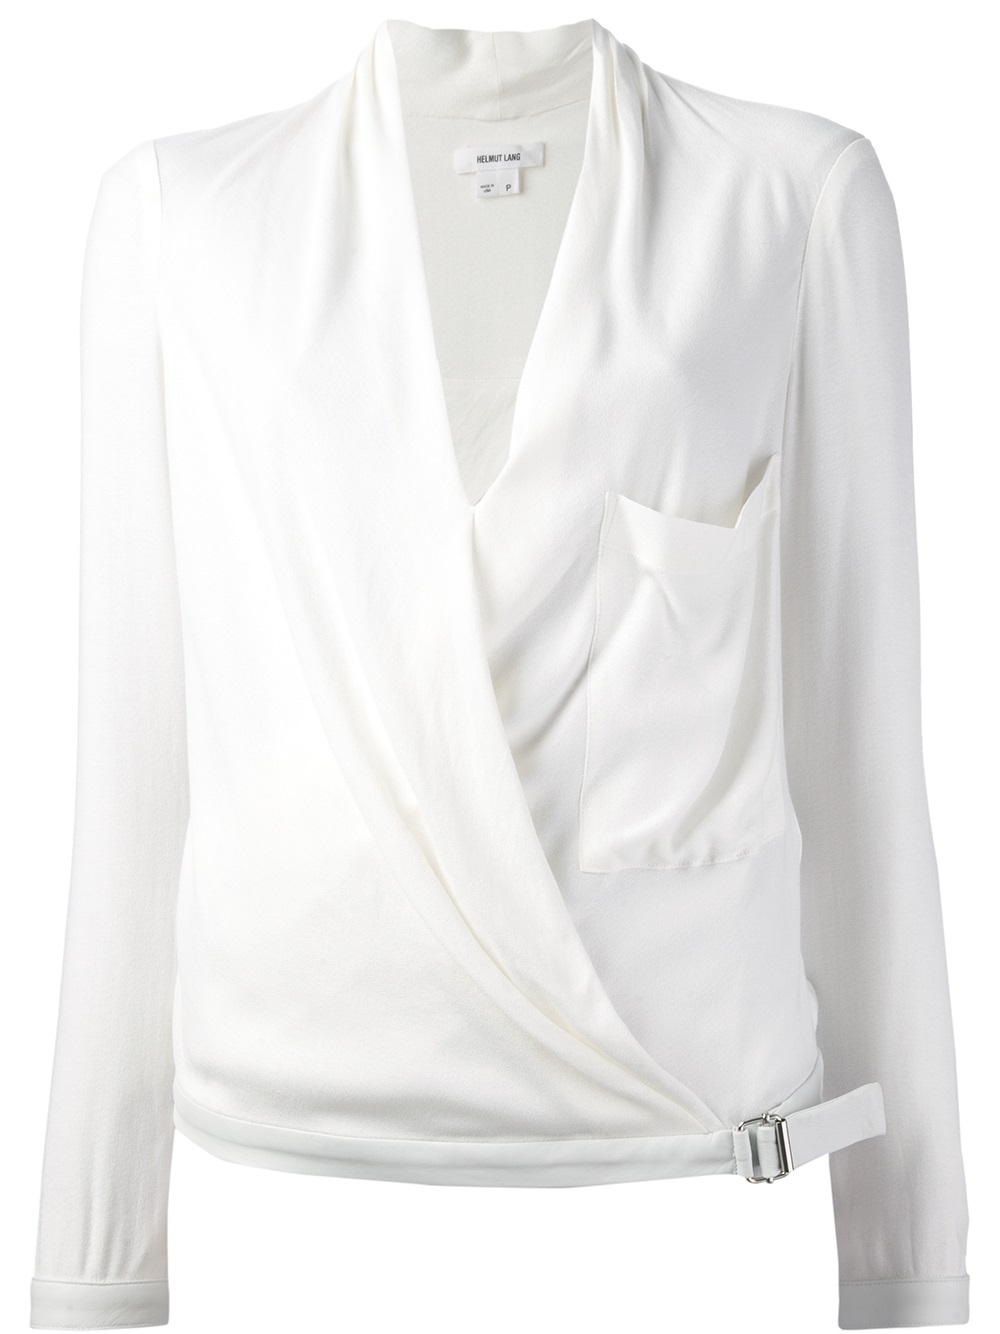 Lyst - Helmut Lang Wrap Over Blouse in White